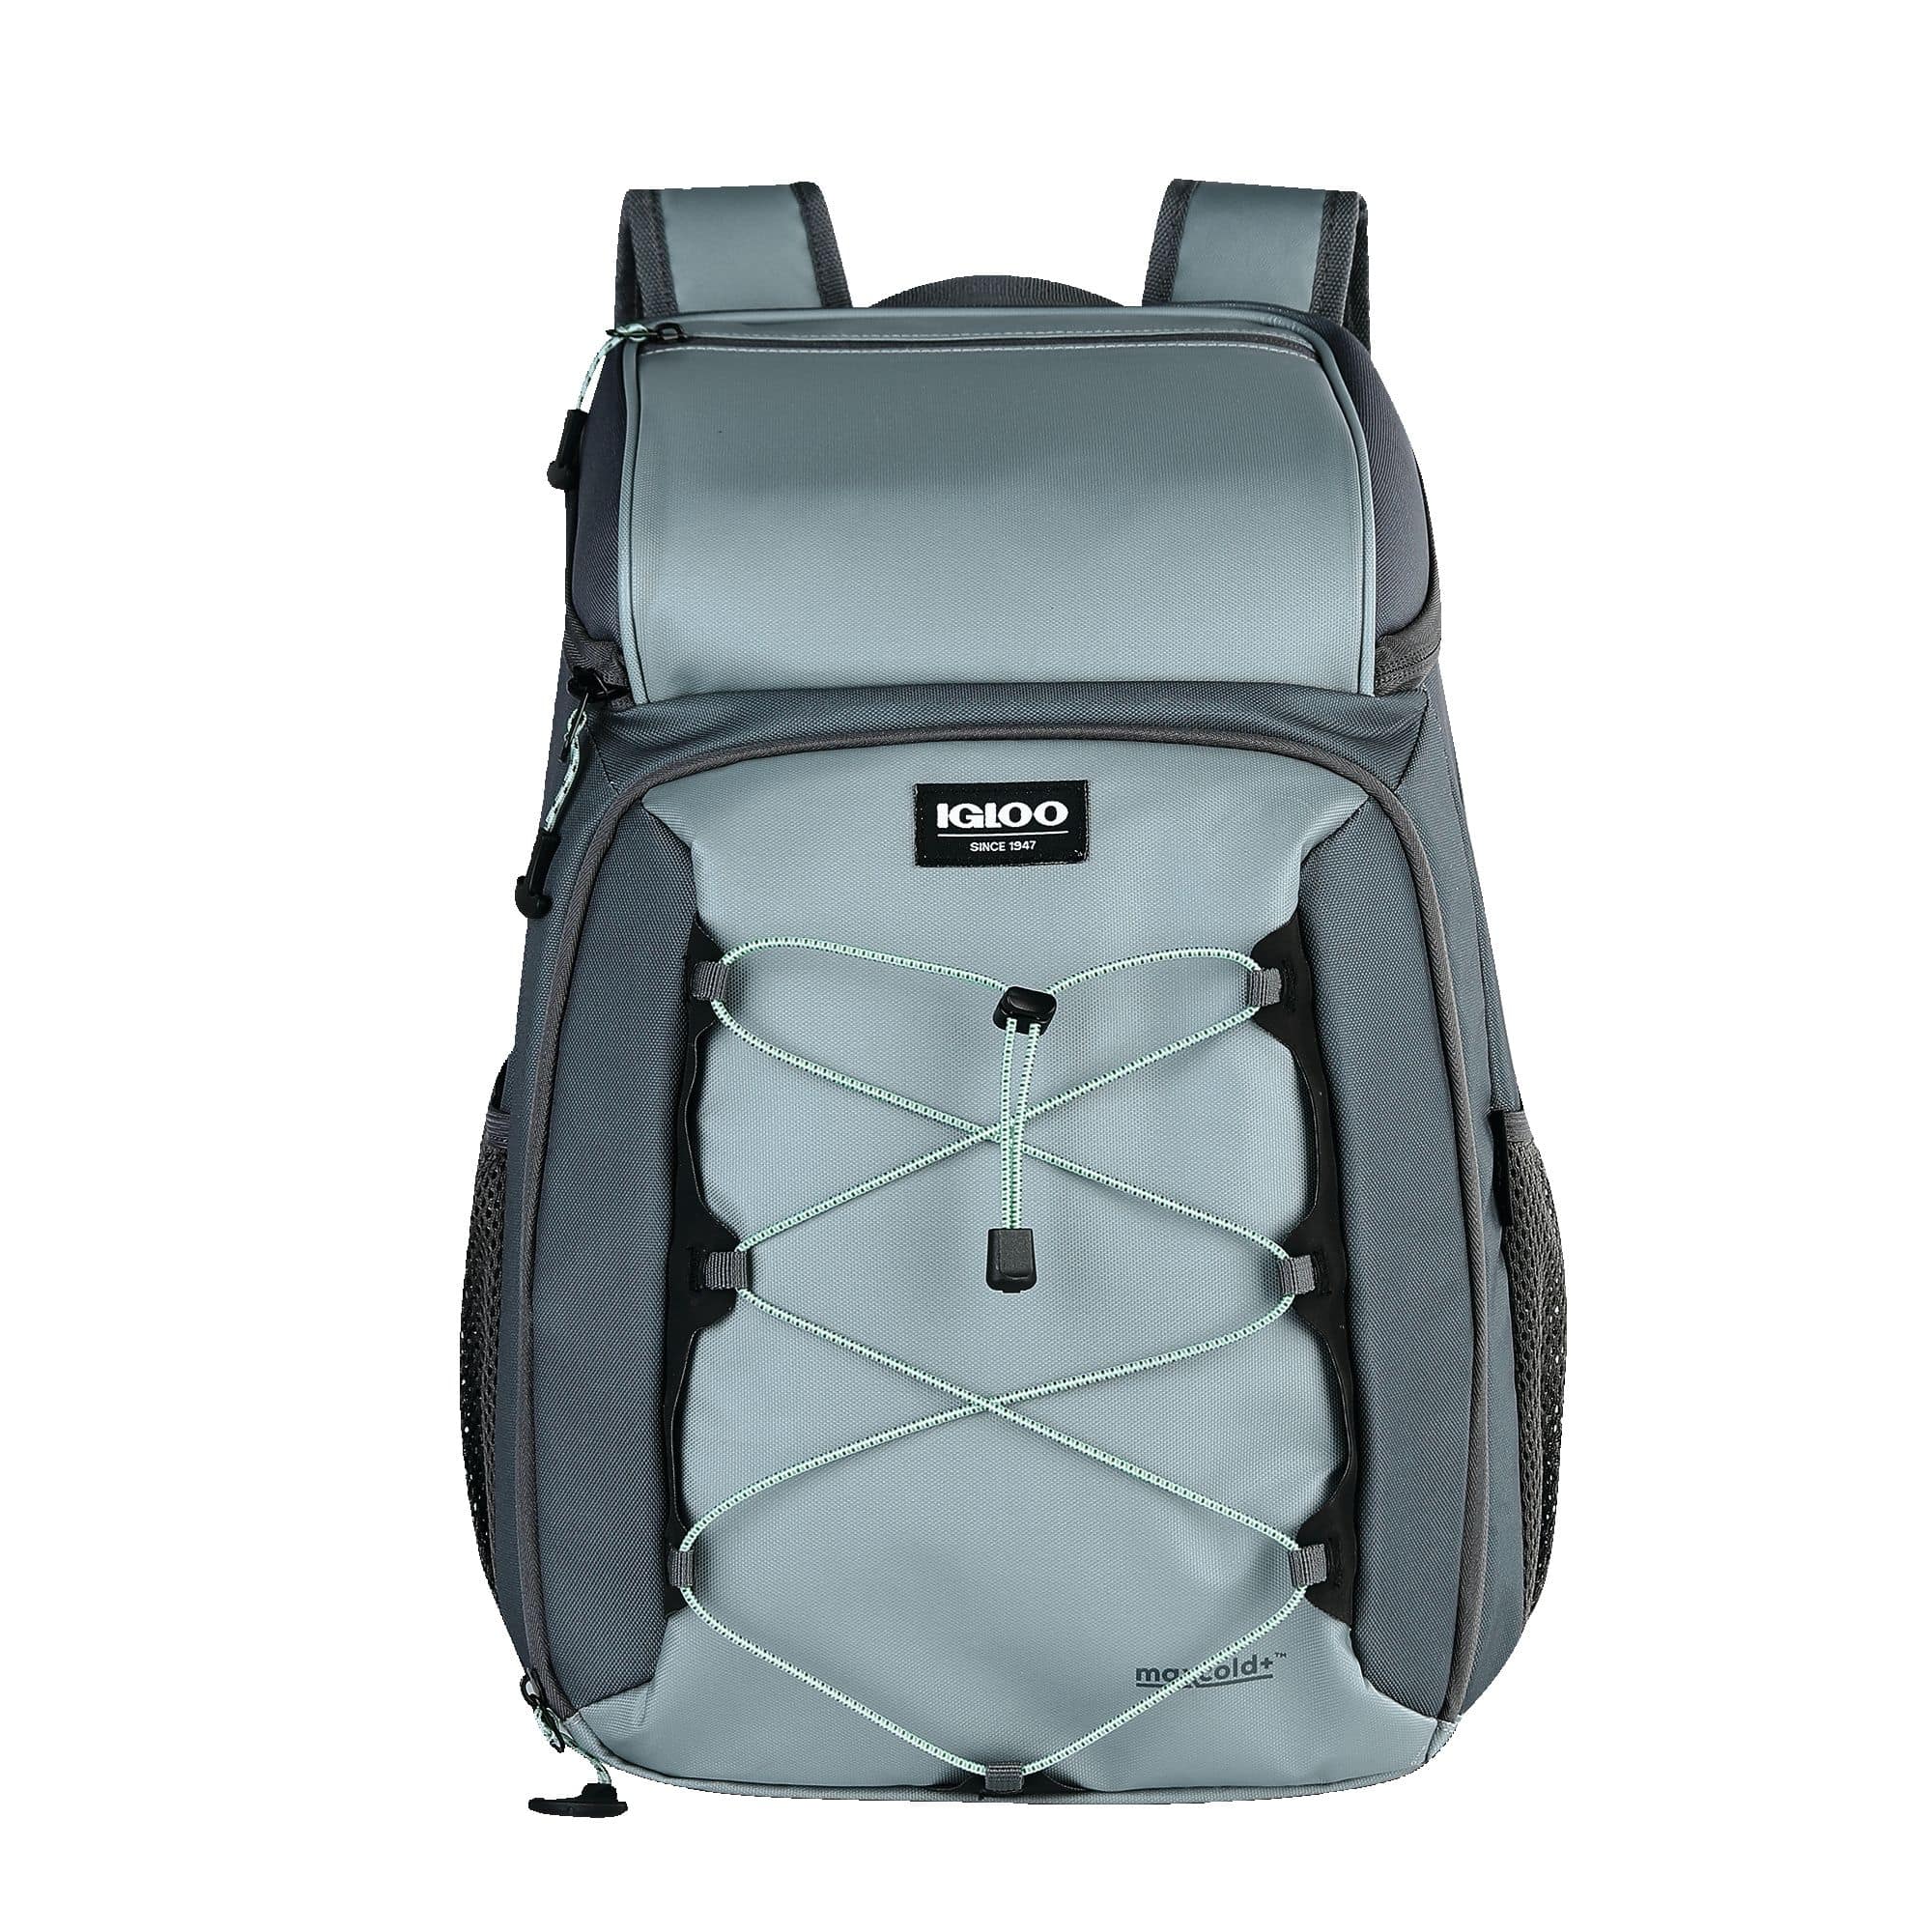 Igloo MaxCold VOYAGER Evergreen Hardtop Backpack, 30-Can Capacity